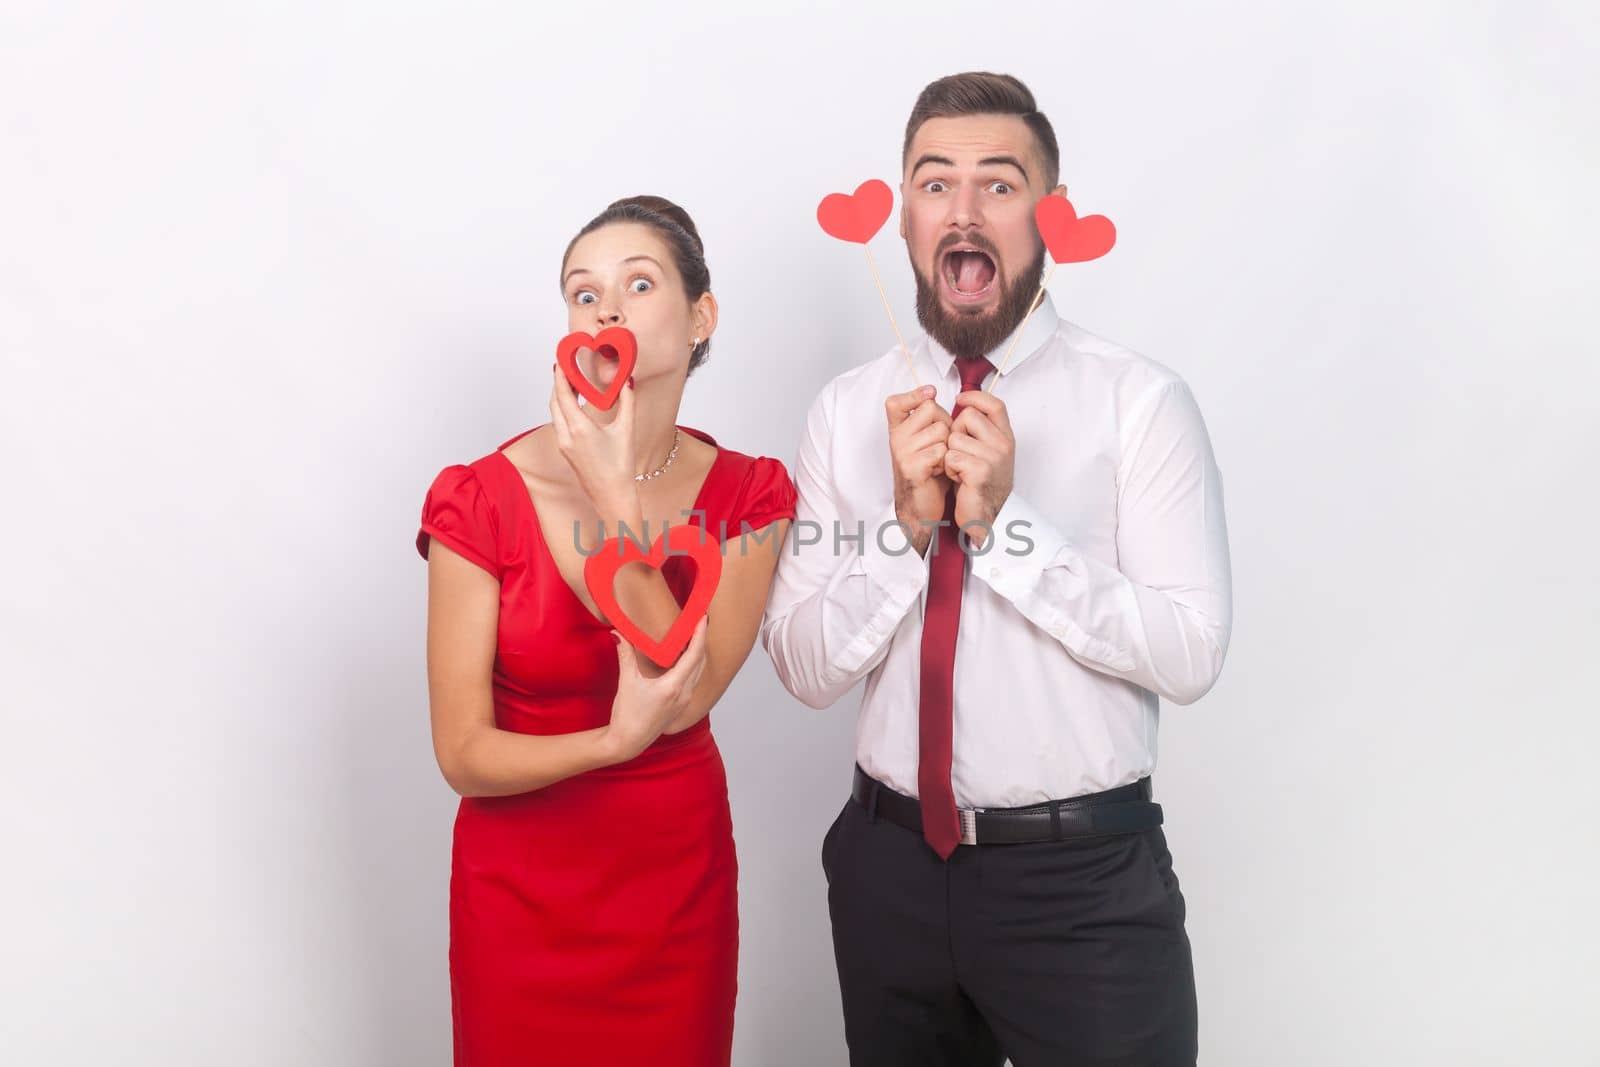 Funny screaming man and woman in red dress with pout lips standing together, holding hear figures. by Khosro1